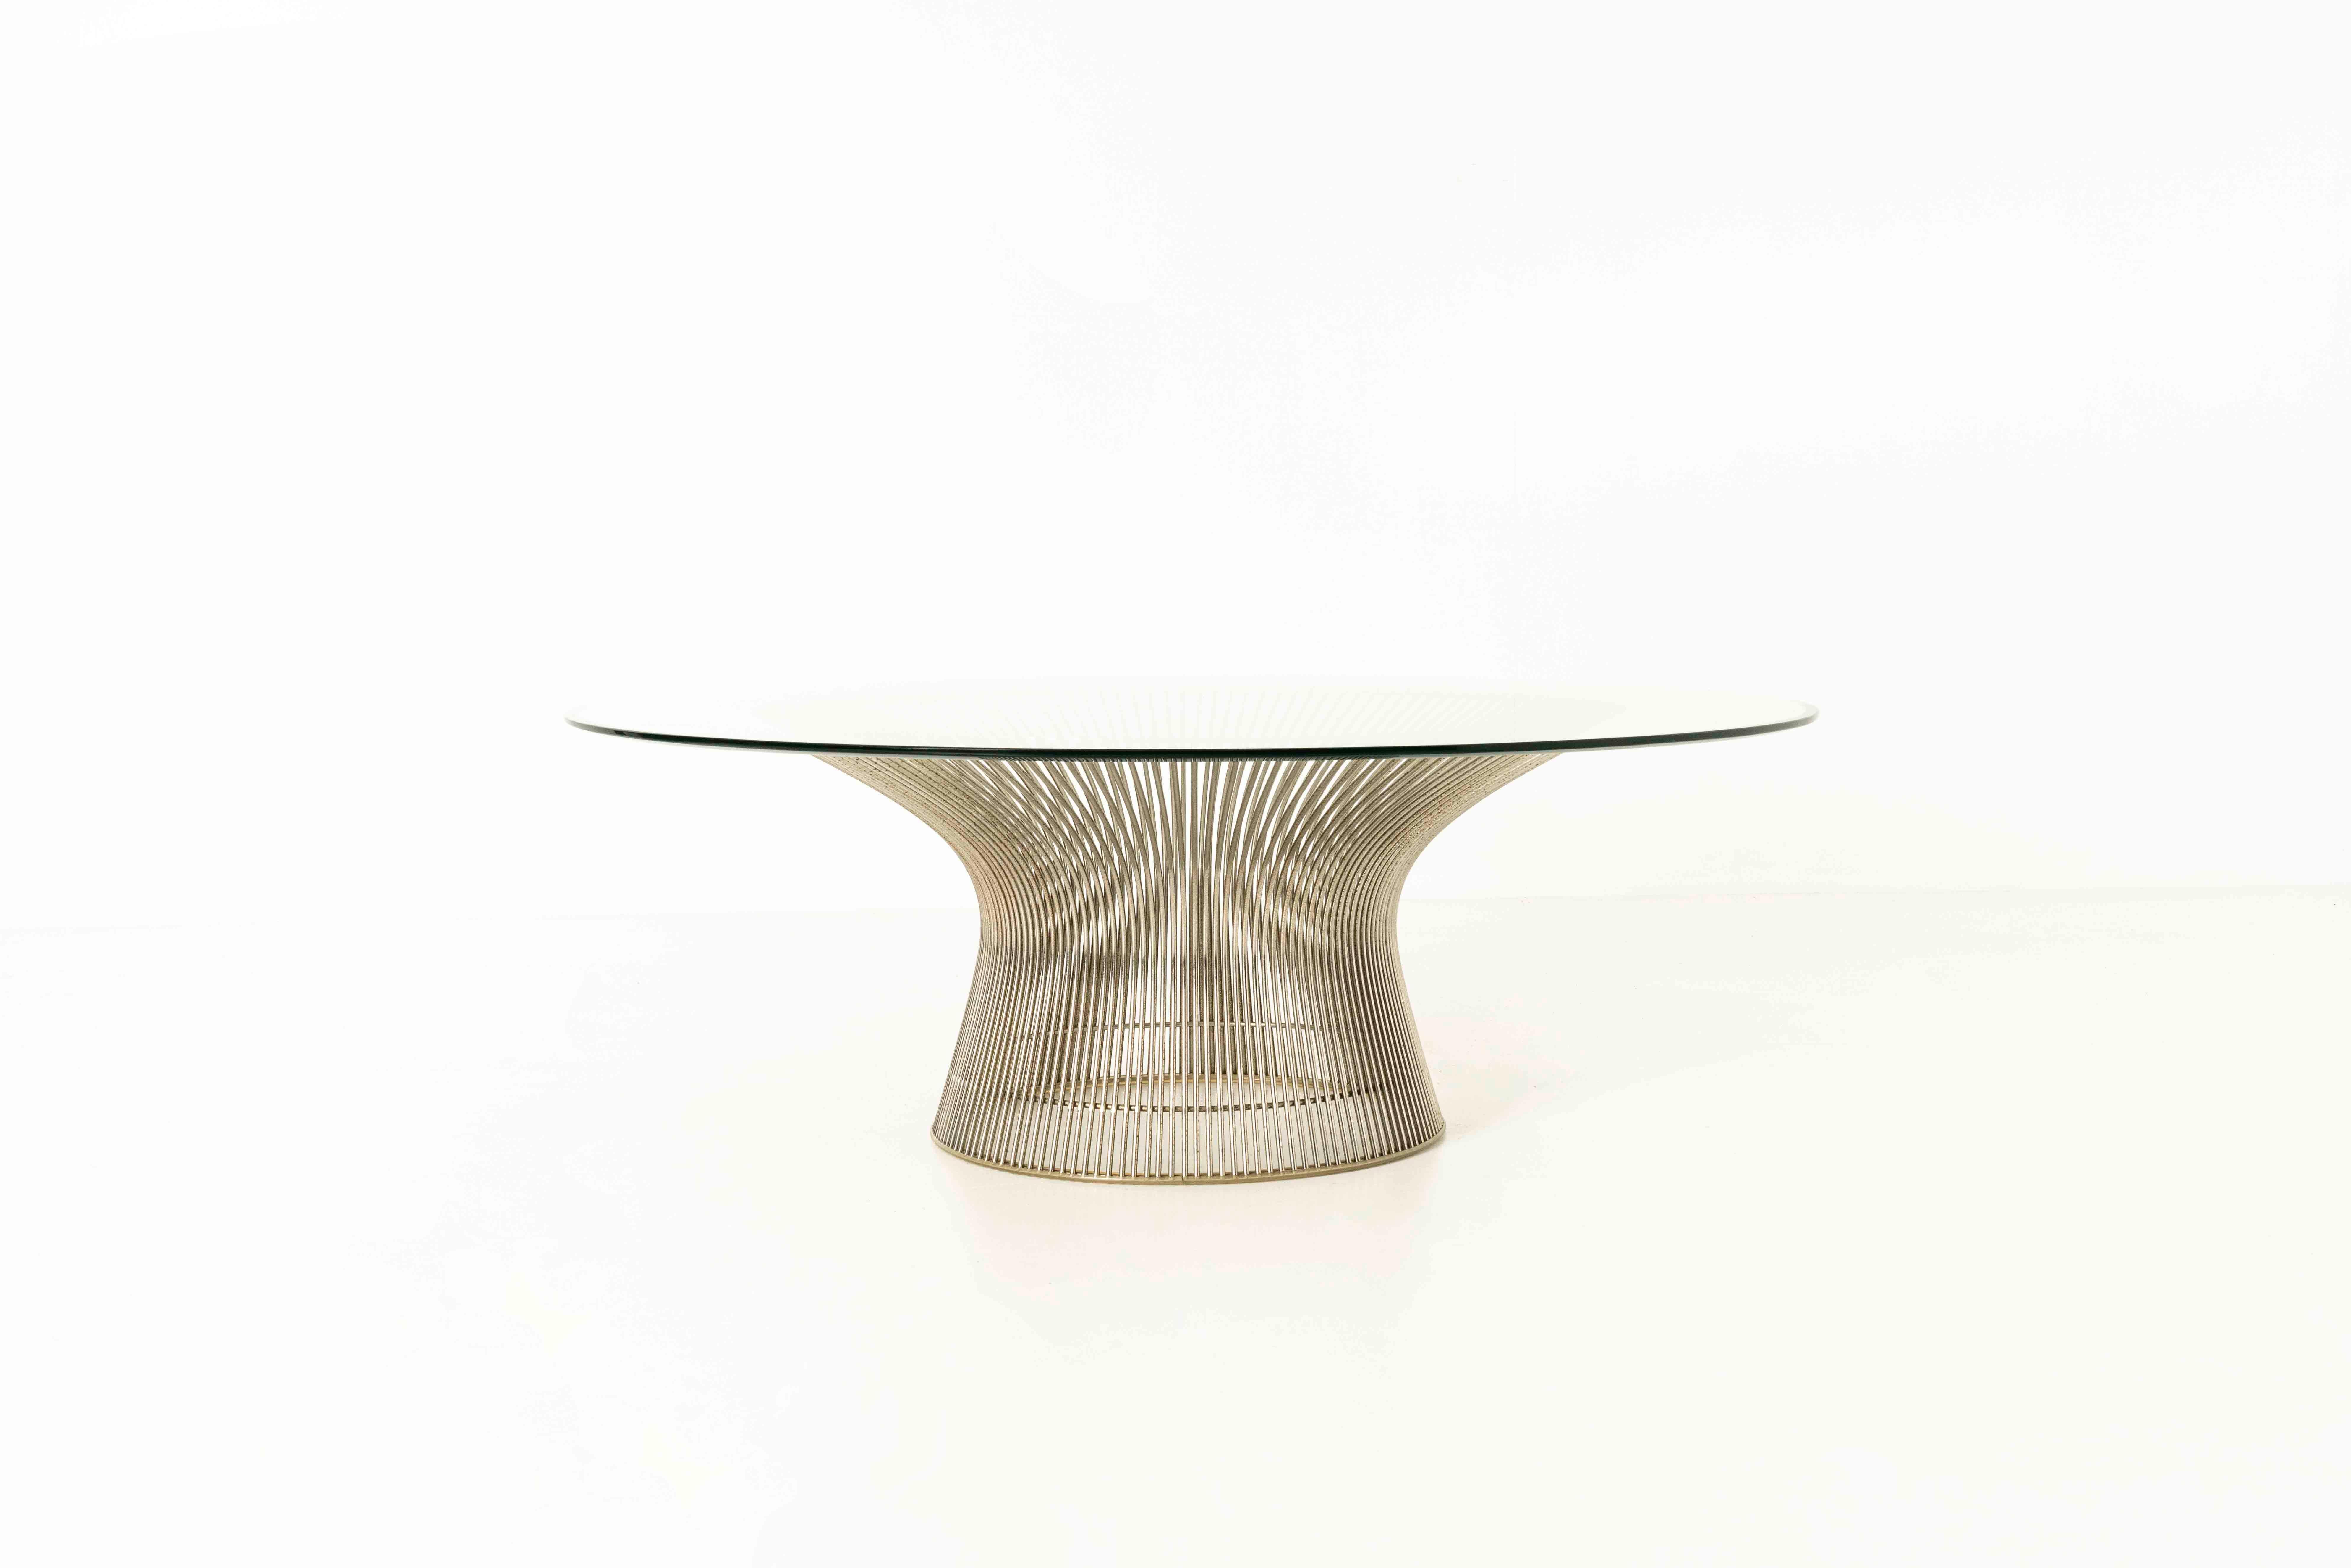 This wireframe and glass coffee table by Warren Platner has become one of the iconic designs from the 20th century. It is created by welding hundreds of curved steel rods to a circular frame, simultaneously serving as structure and ornament. The